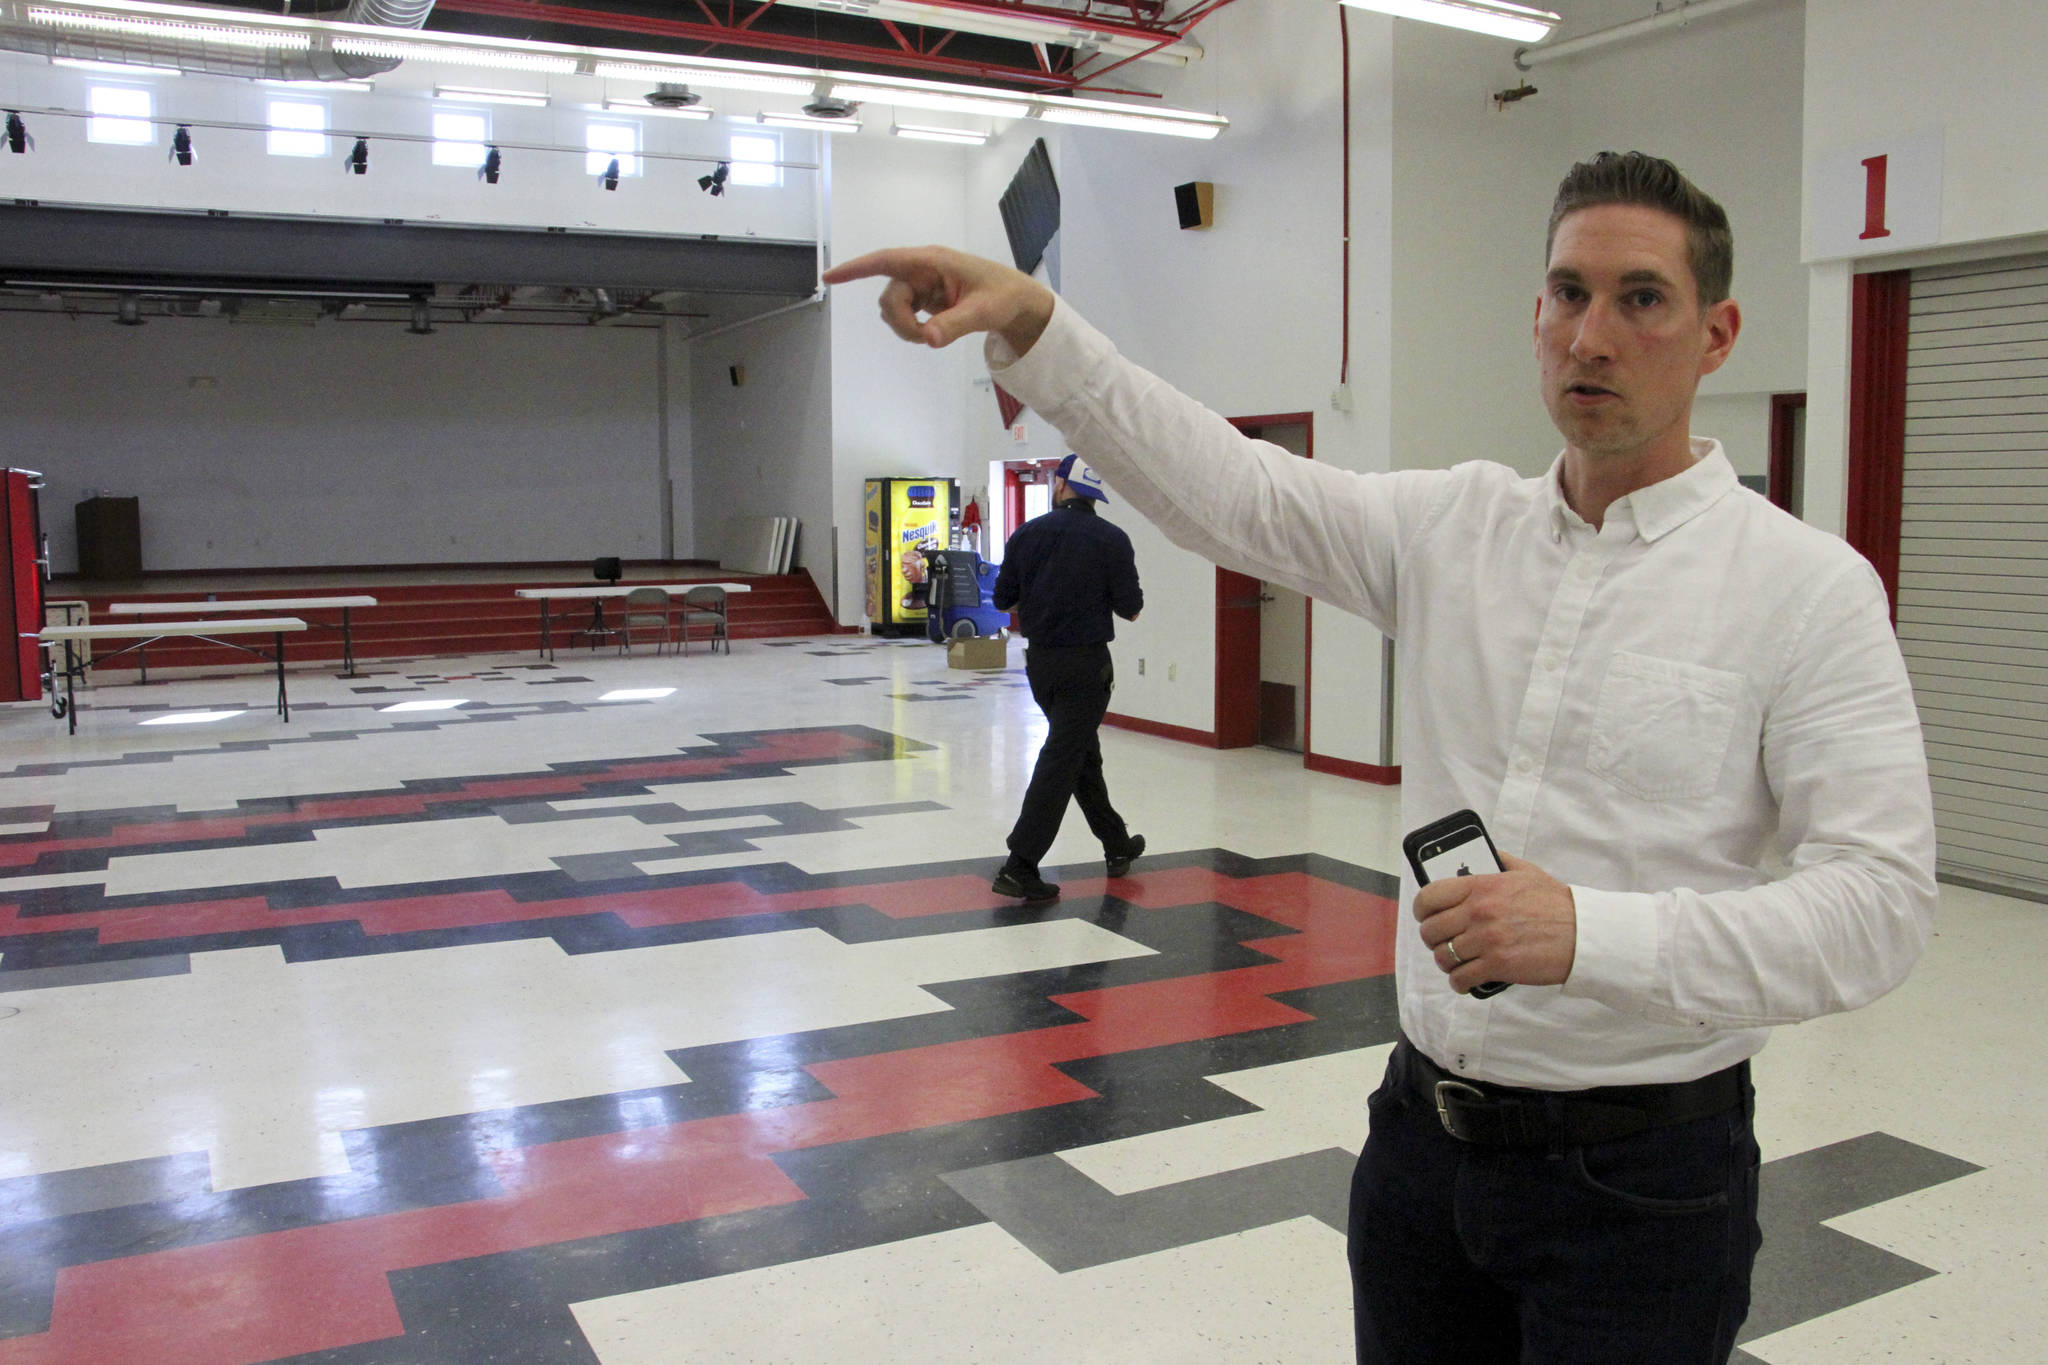 This June 14, 2019, photo shows Jeremy Price, a deputy chief of staff to Alaska Gov. Mike Dunleavy, showing reporters the cafeteria at Wasilla Middle School in Wasilla, Alaska, that would be available to lawmakers. Dunleavy has called lawmakers into special session in Wasilla beginning July 8, but some lawmakers have expressed concerns over security and logistics with the location more than 500 miles from the state capital of Juneau, Alaska. (AP Photo/Mark Thiessen)